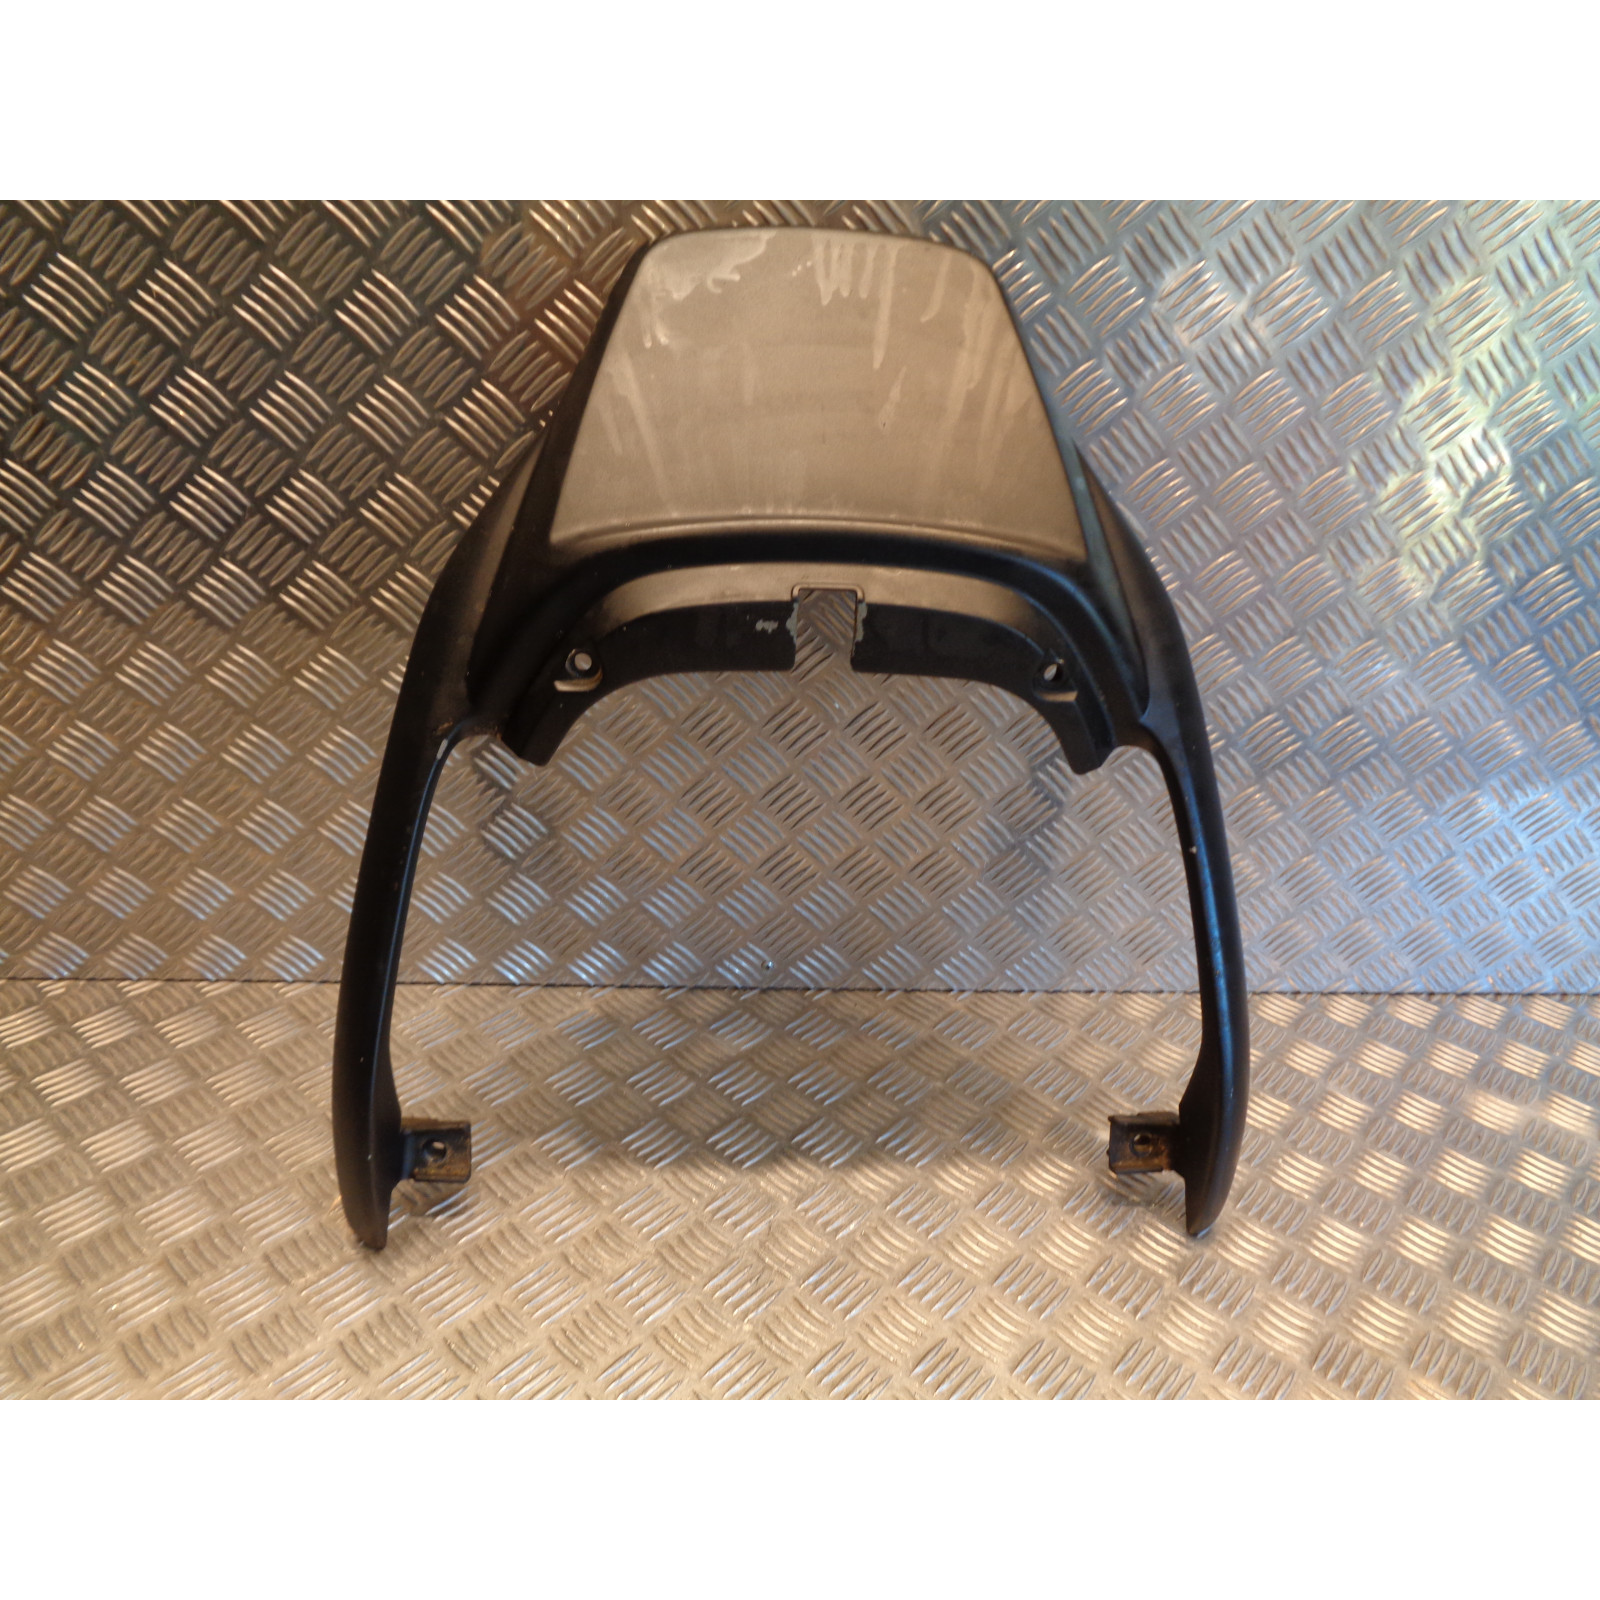 poignee maintien passagere support porte bagage top case scooter honda fjs 600 silverwing 2002